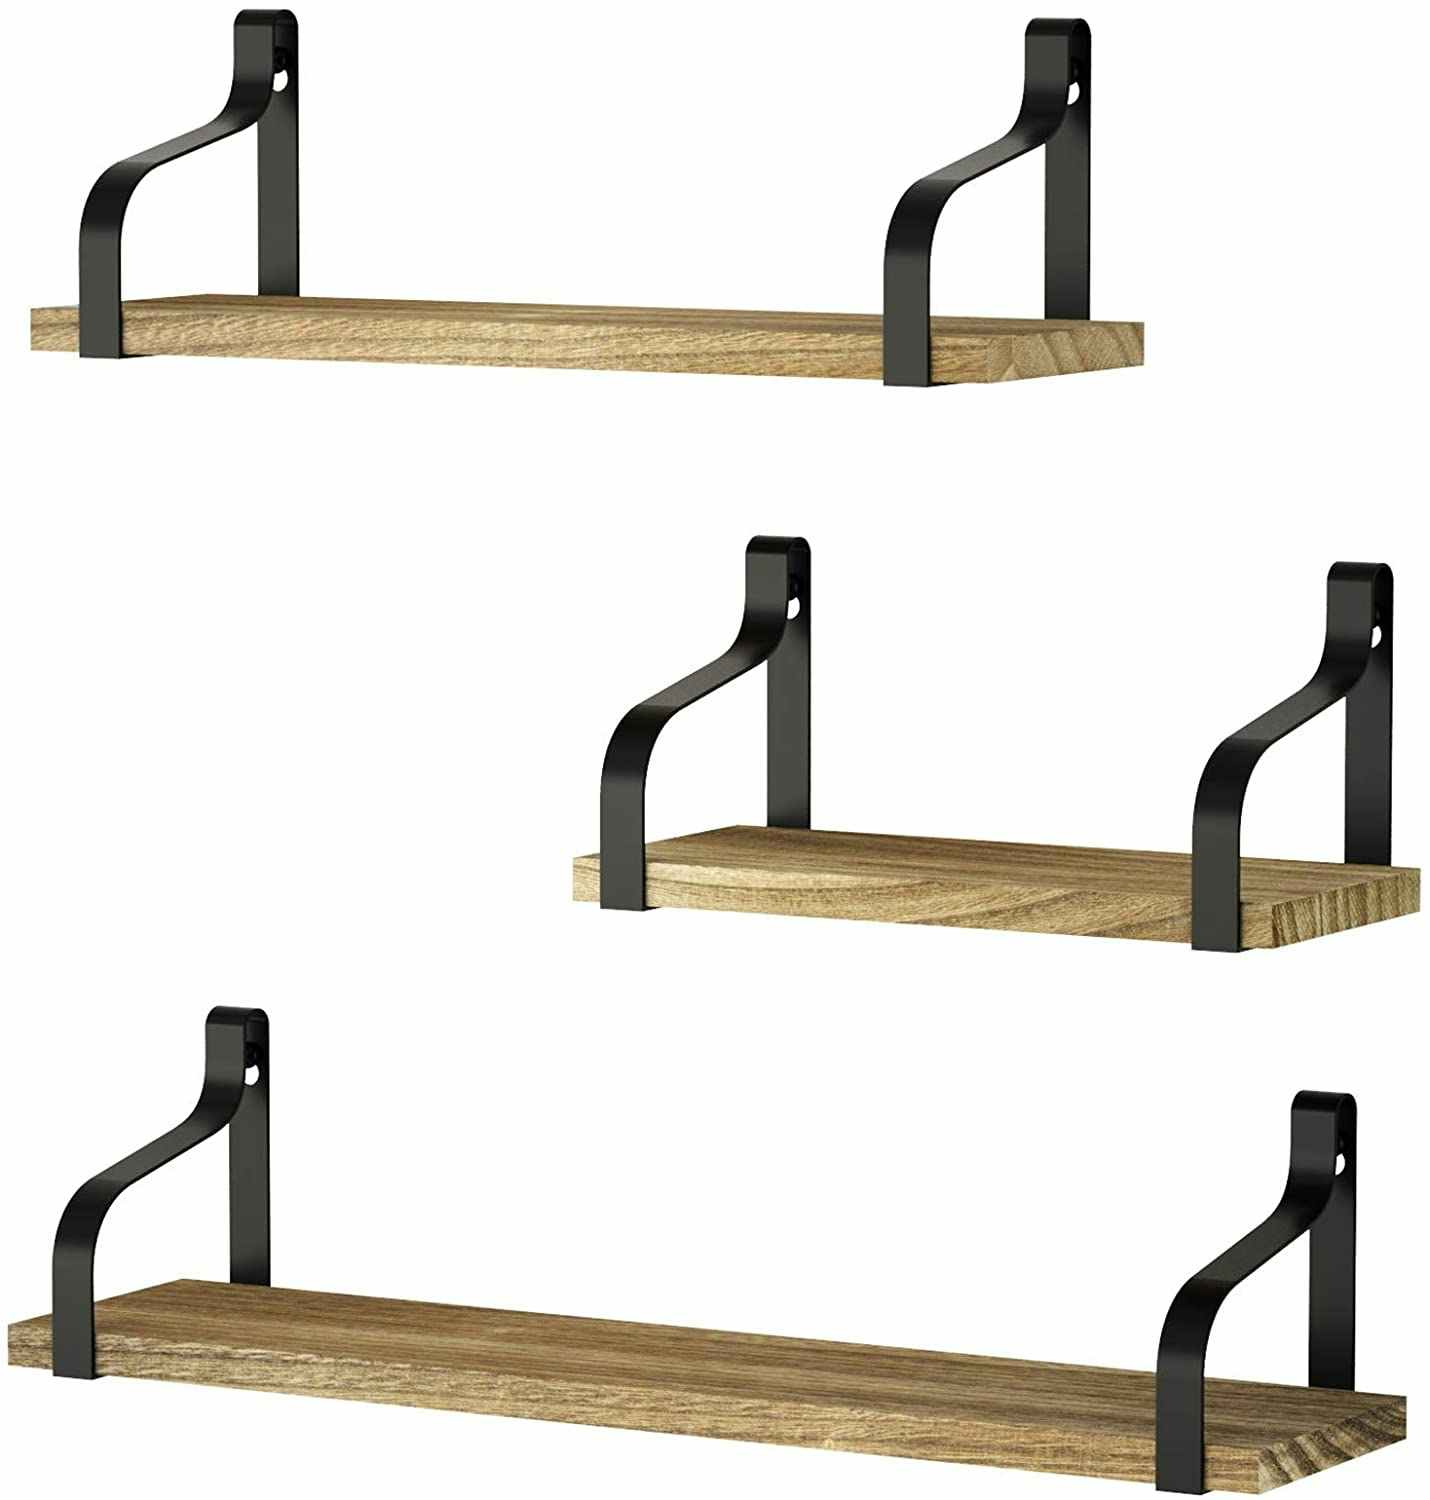 A pack of three rustic floatin shelves.